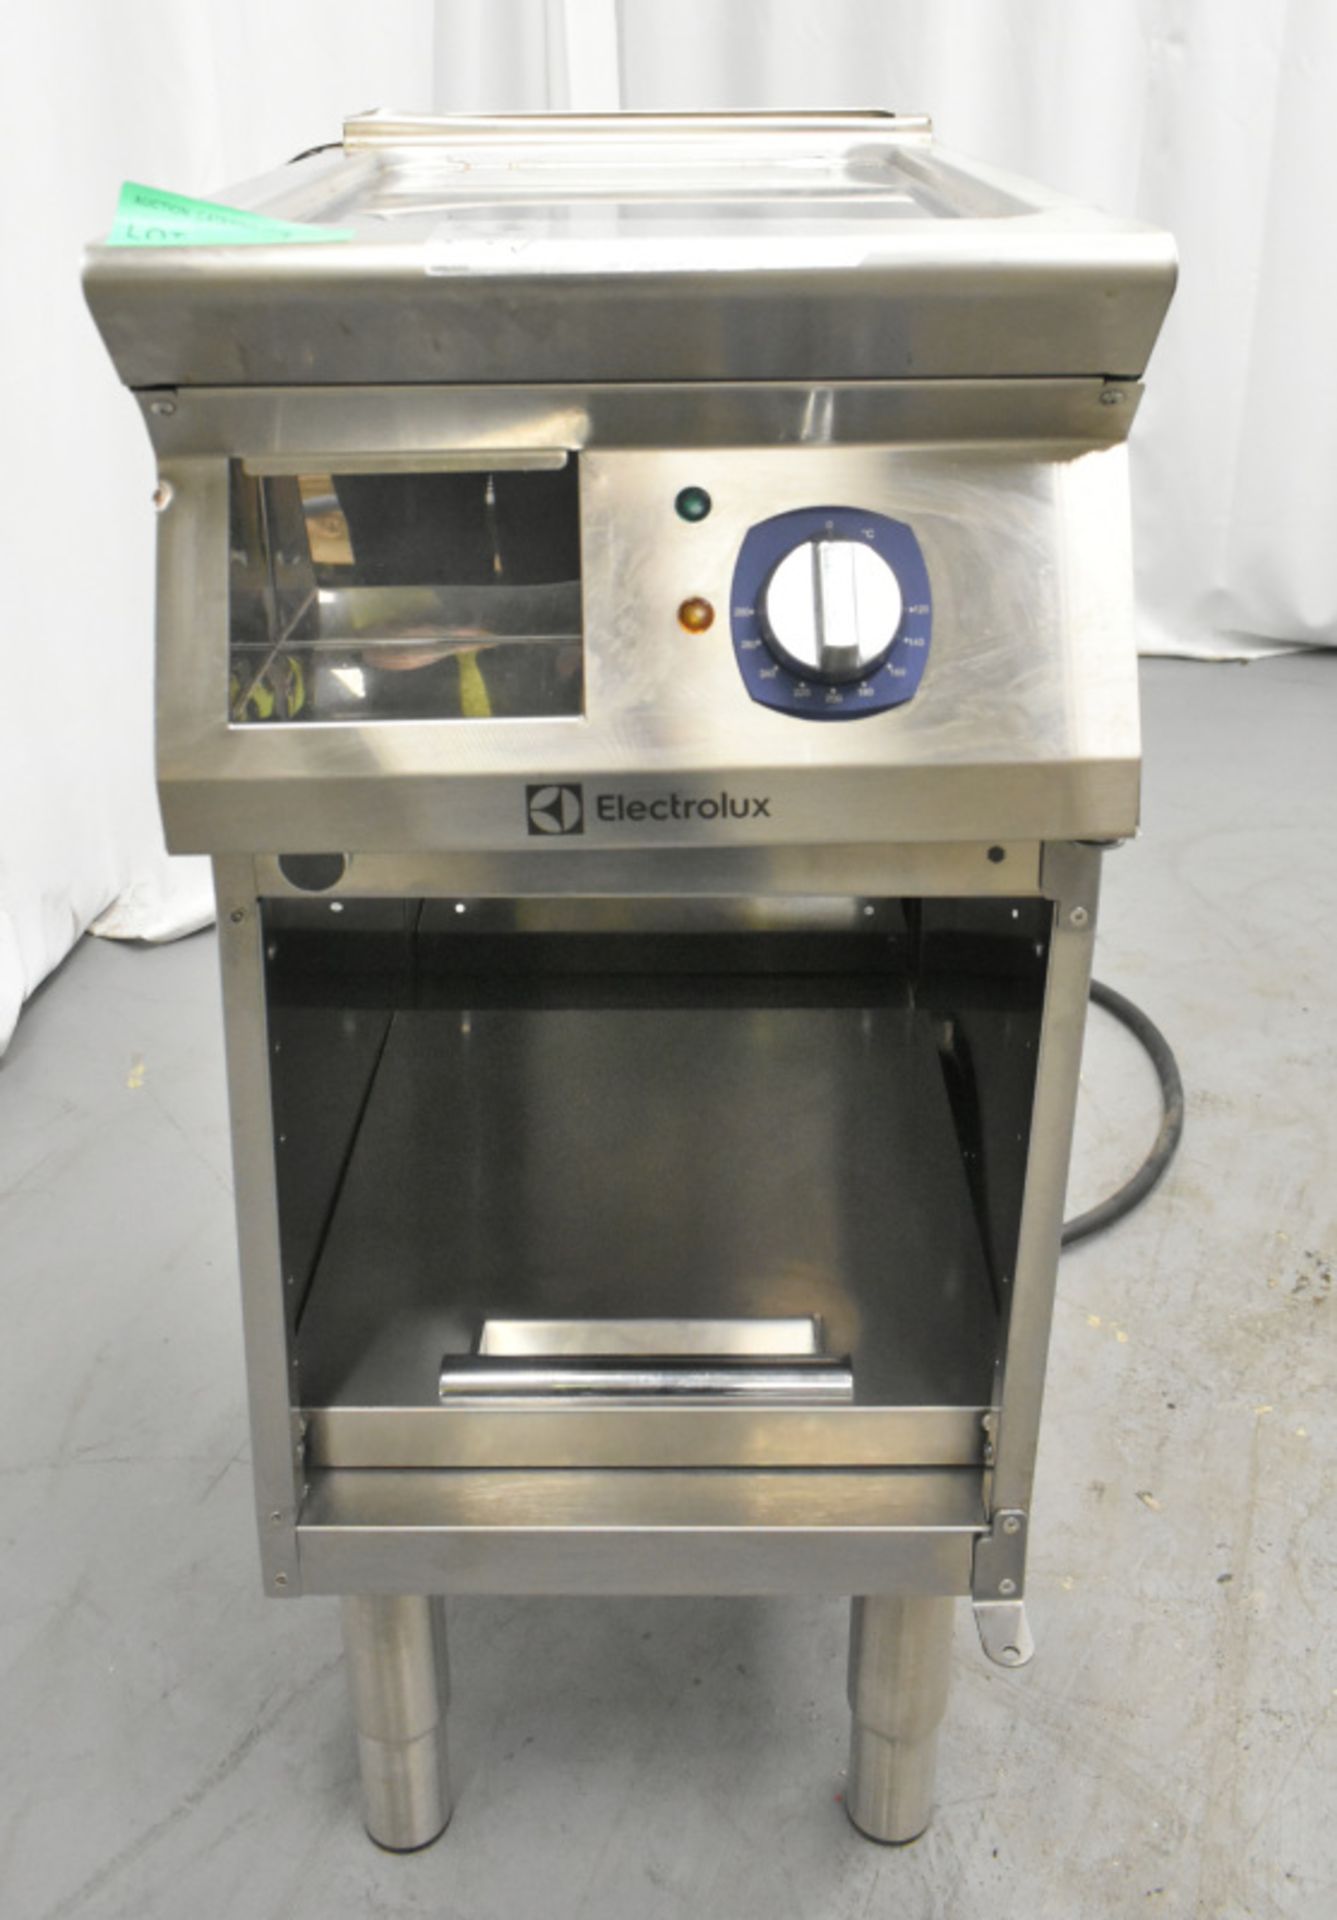 Electrolux 3 Phase Electric griddle